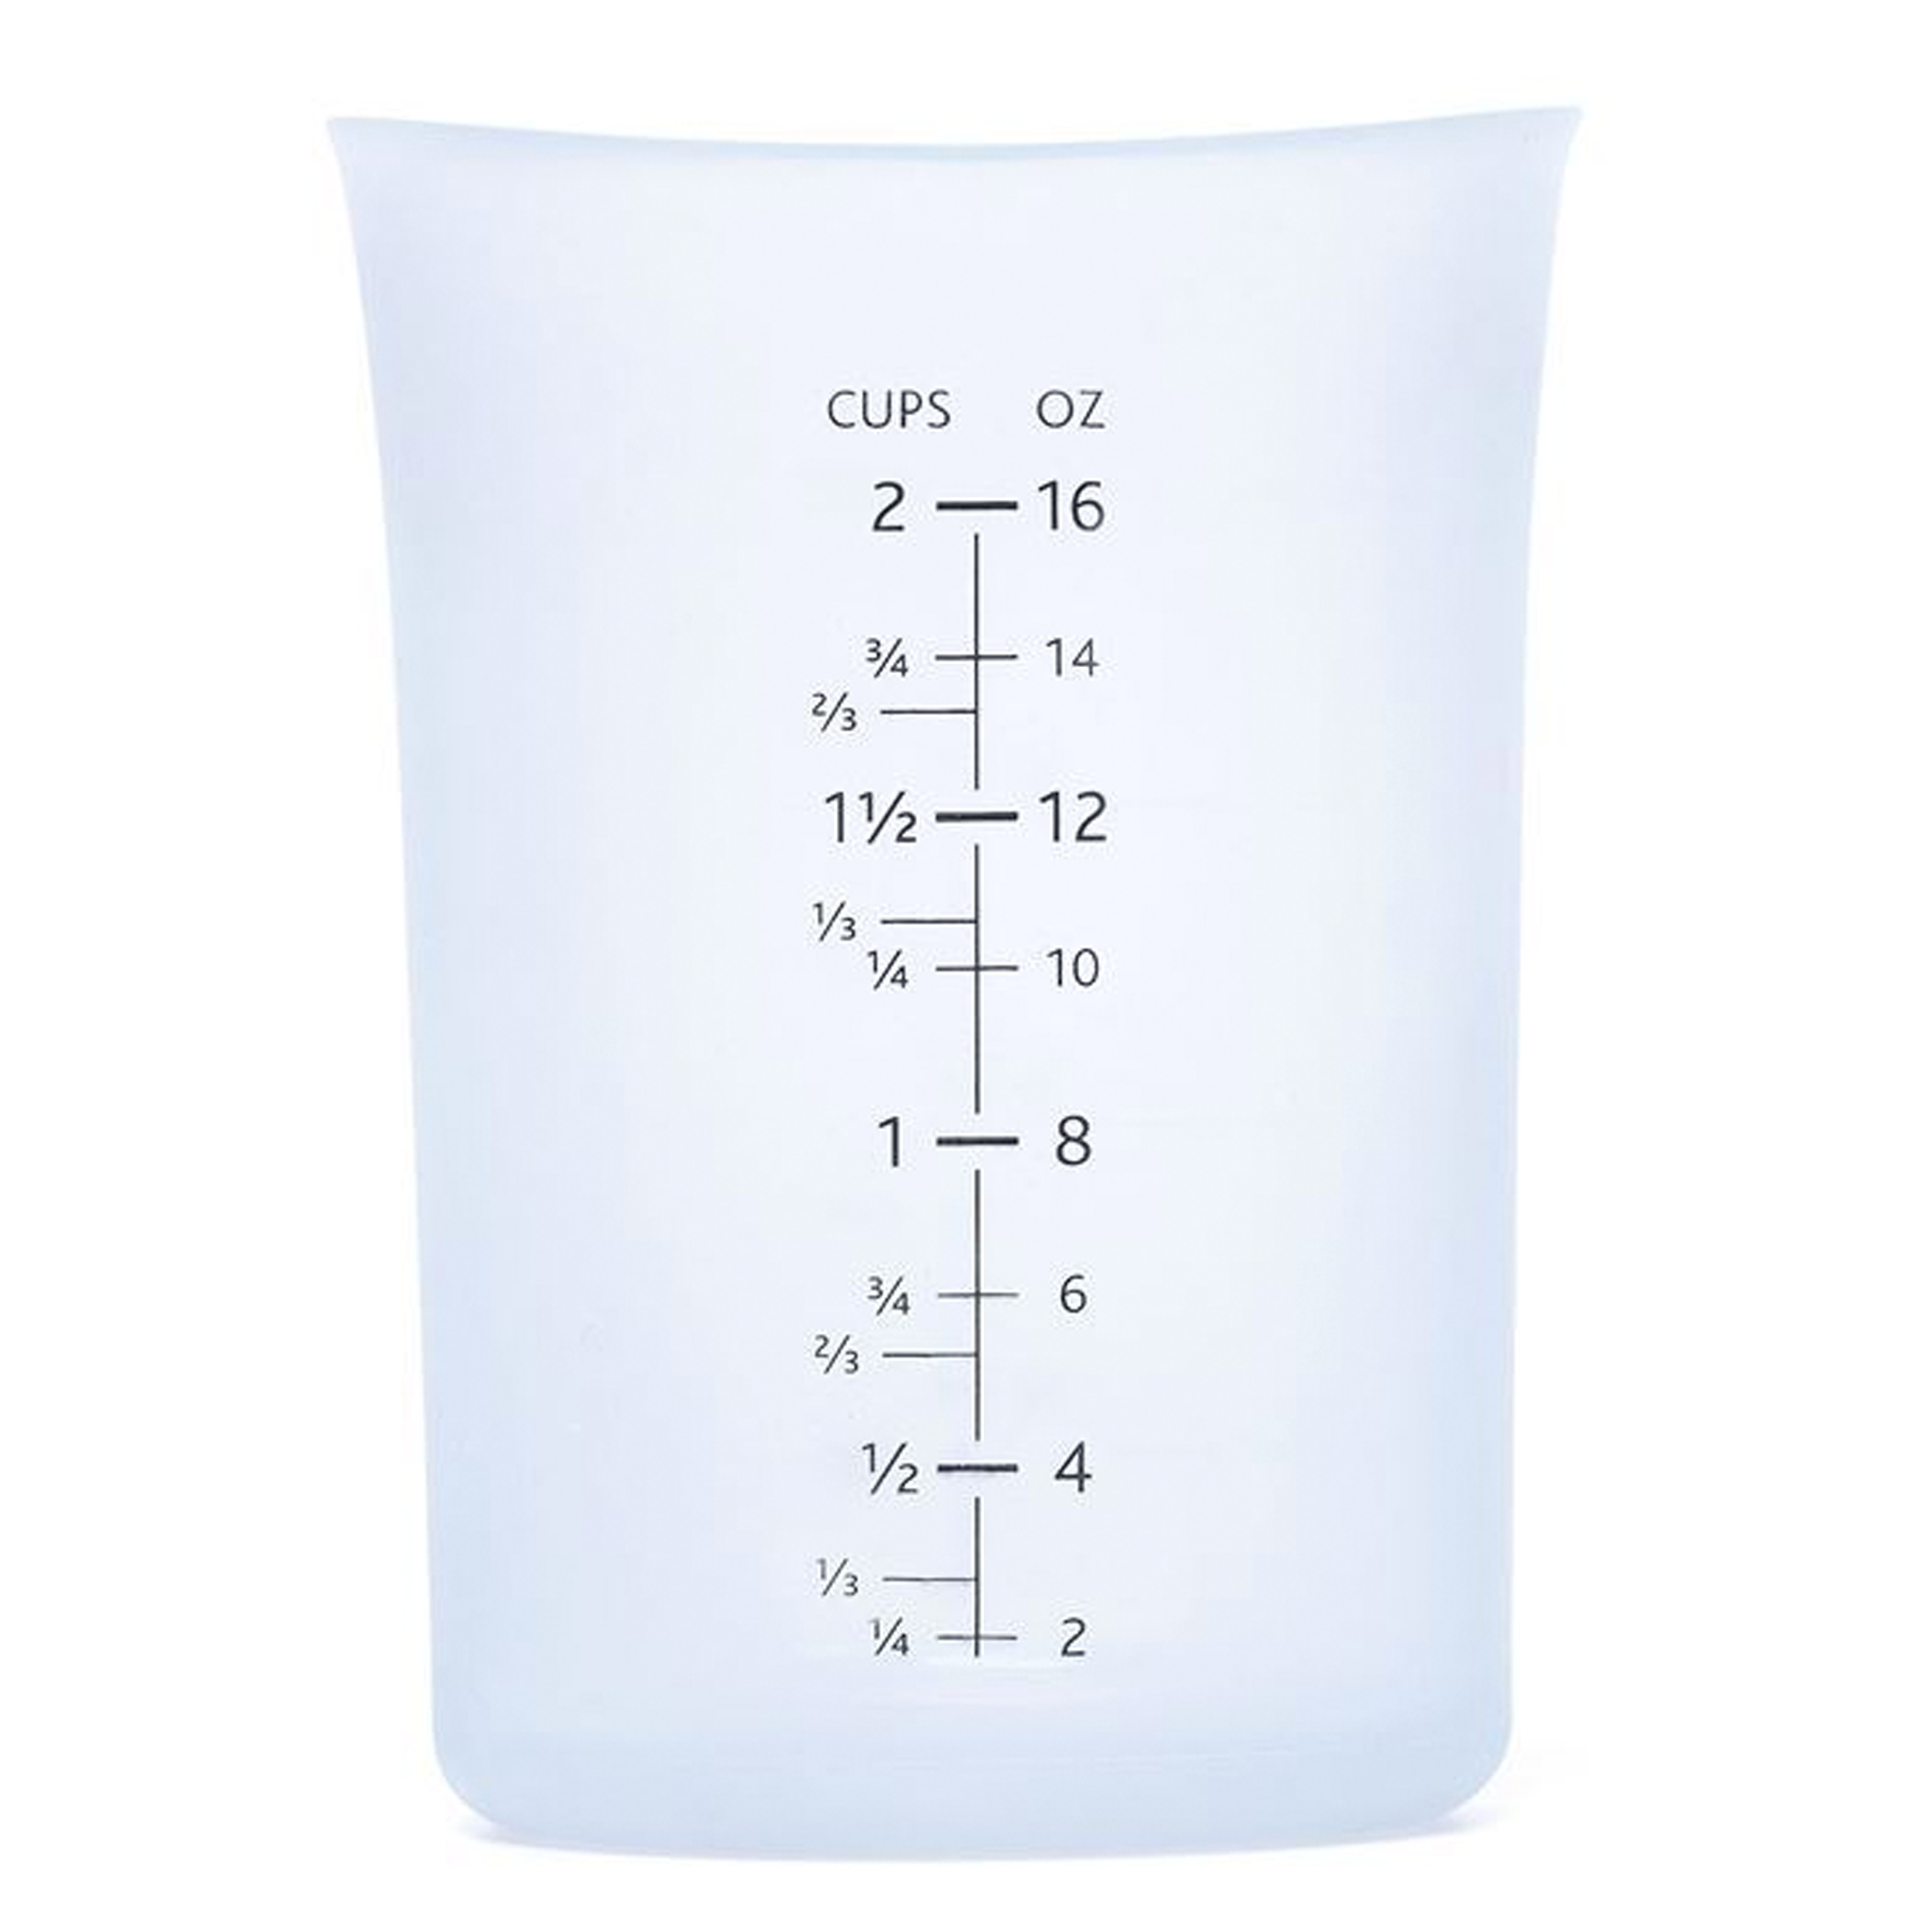 Isi Flex Measuring Cup Set of 3